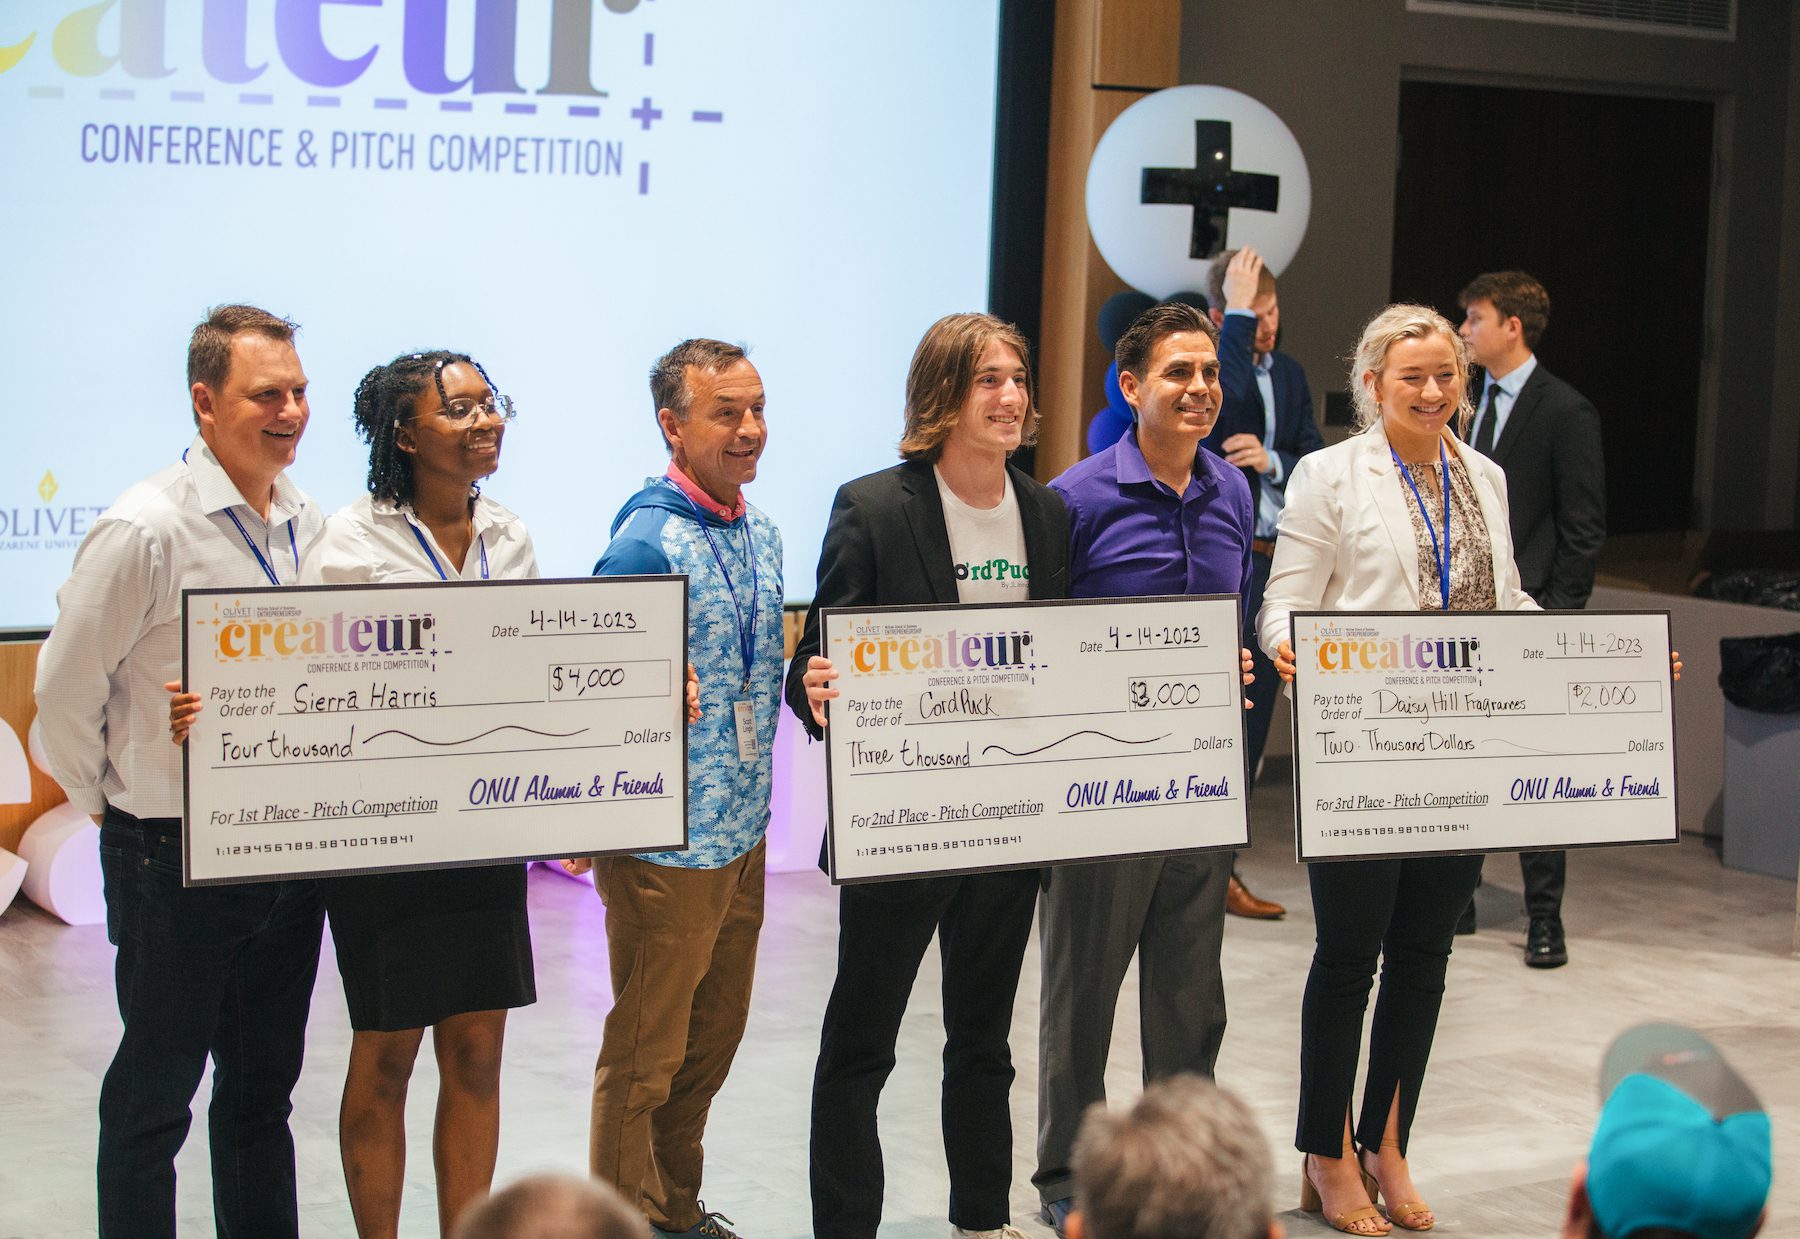 Createur Conference and Pitch Competition, hosted by McGraw School of Business at Olivet Nazarene University